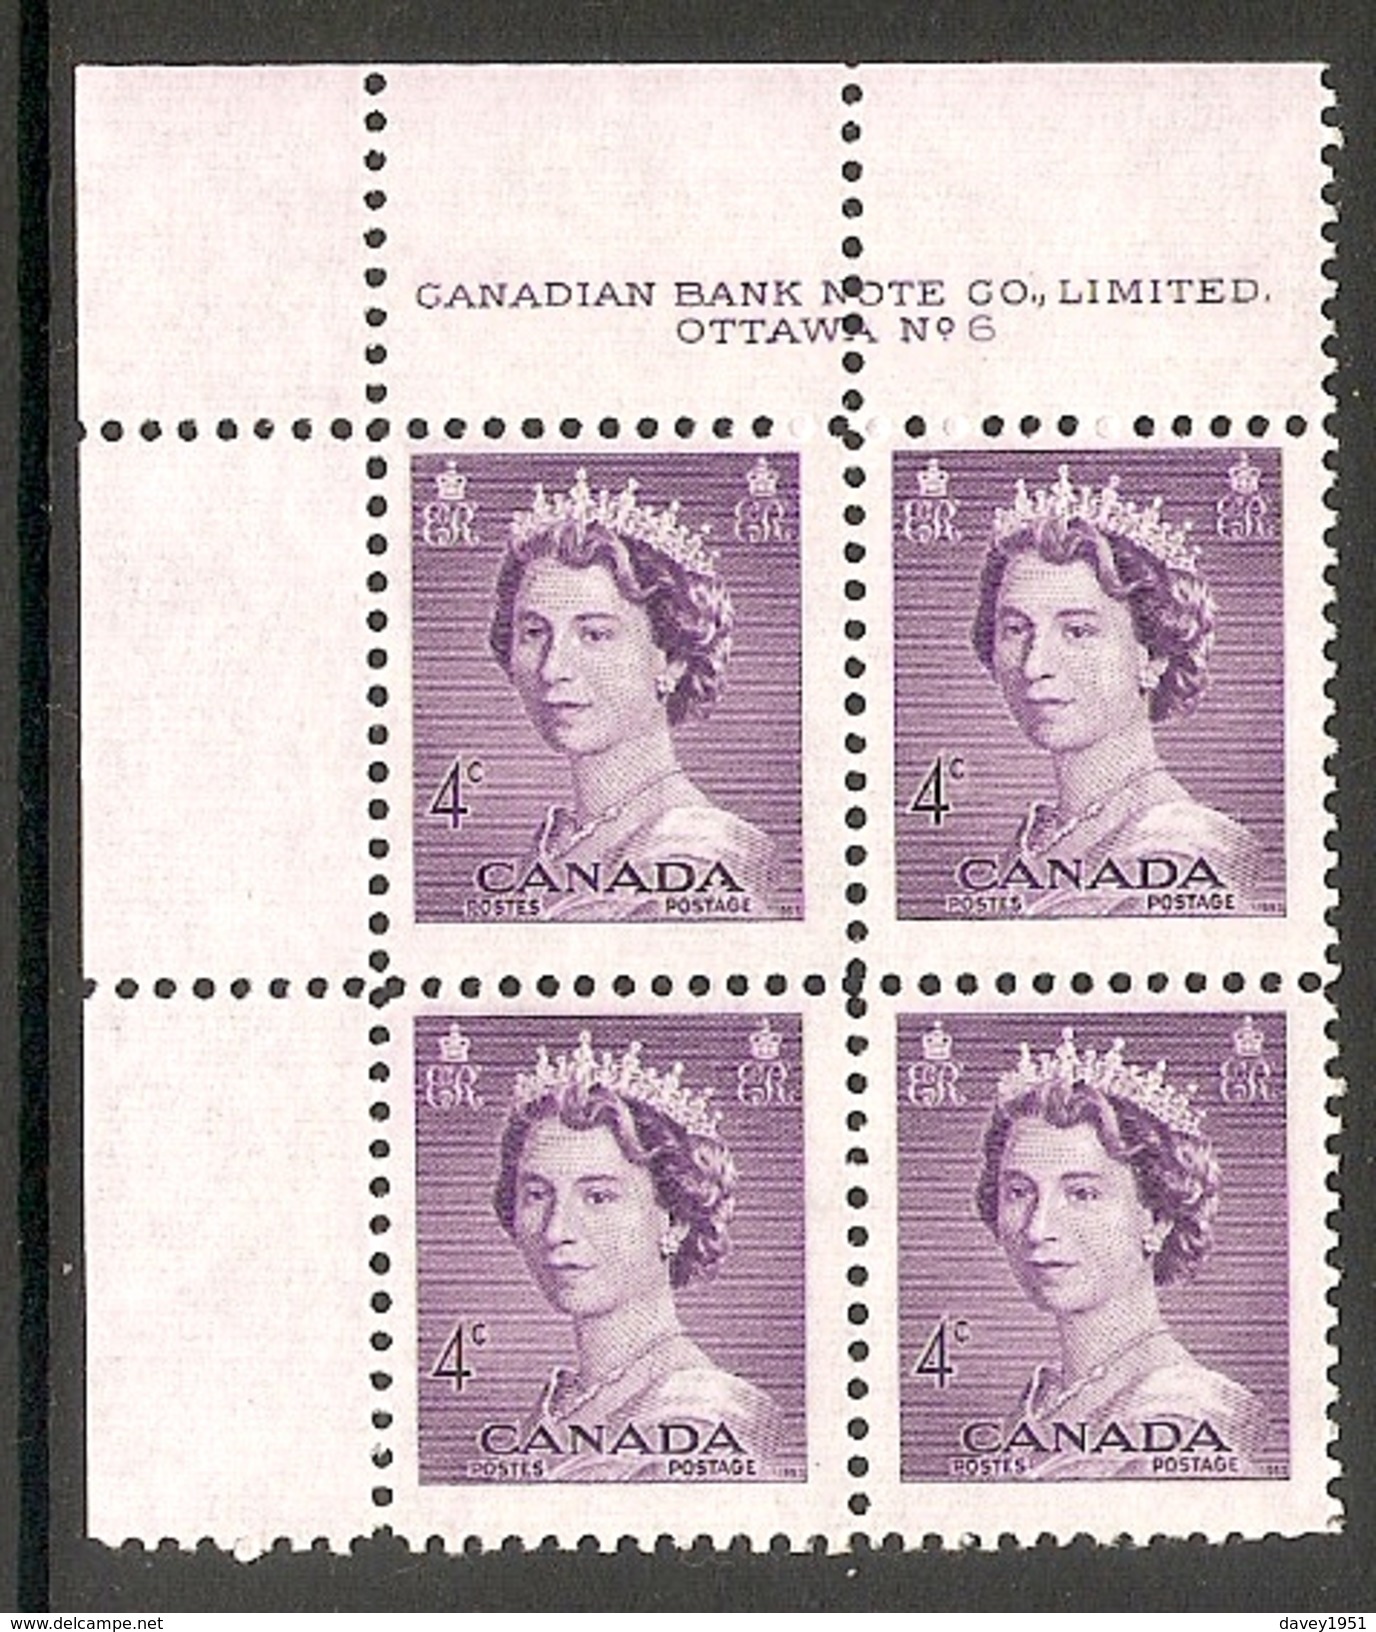 003600 Canada 1953 4c MNH Plate 6 Block UL - Num. Planches & Inscriptions Marge